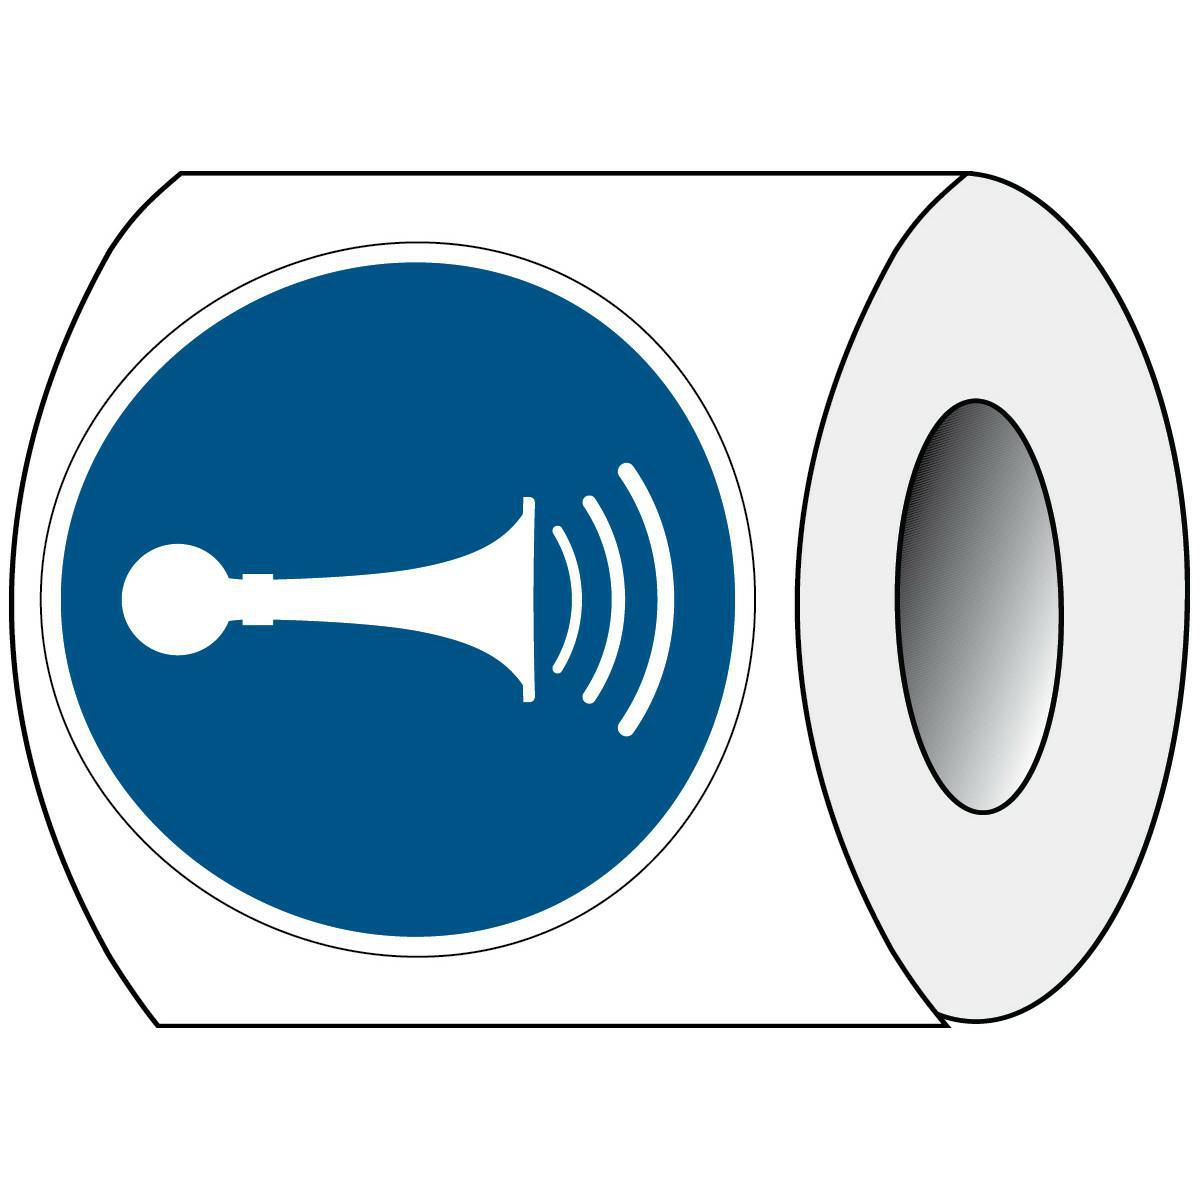 Brady PIC M029-DIA 050-PE-ROLL1 W128401850 ISO Safety Sign - Sound horn 